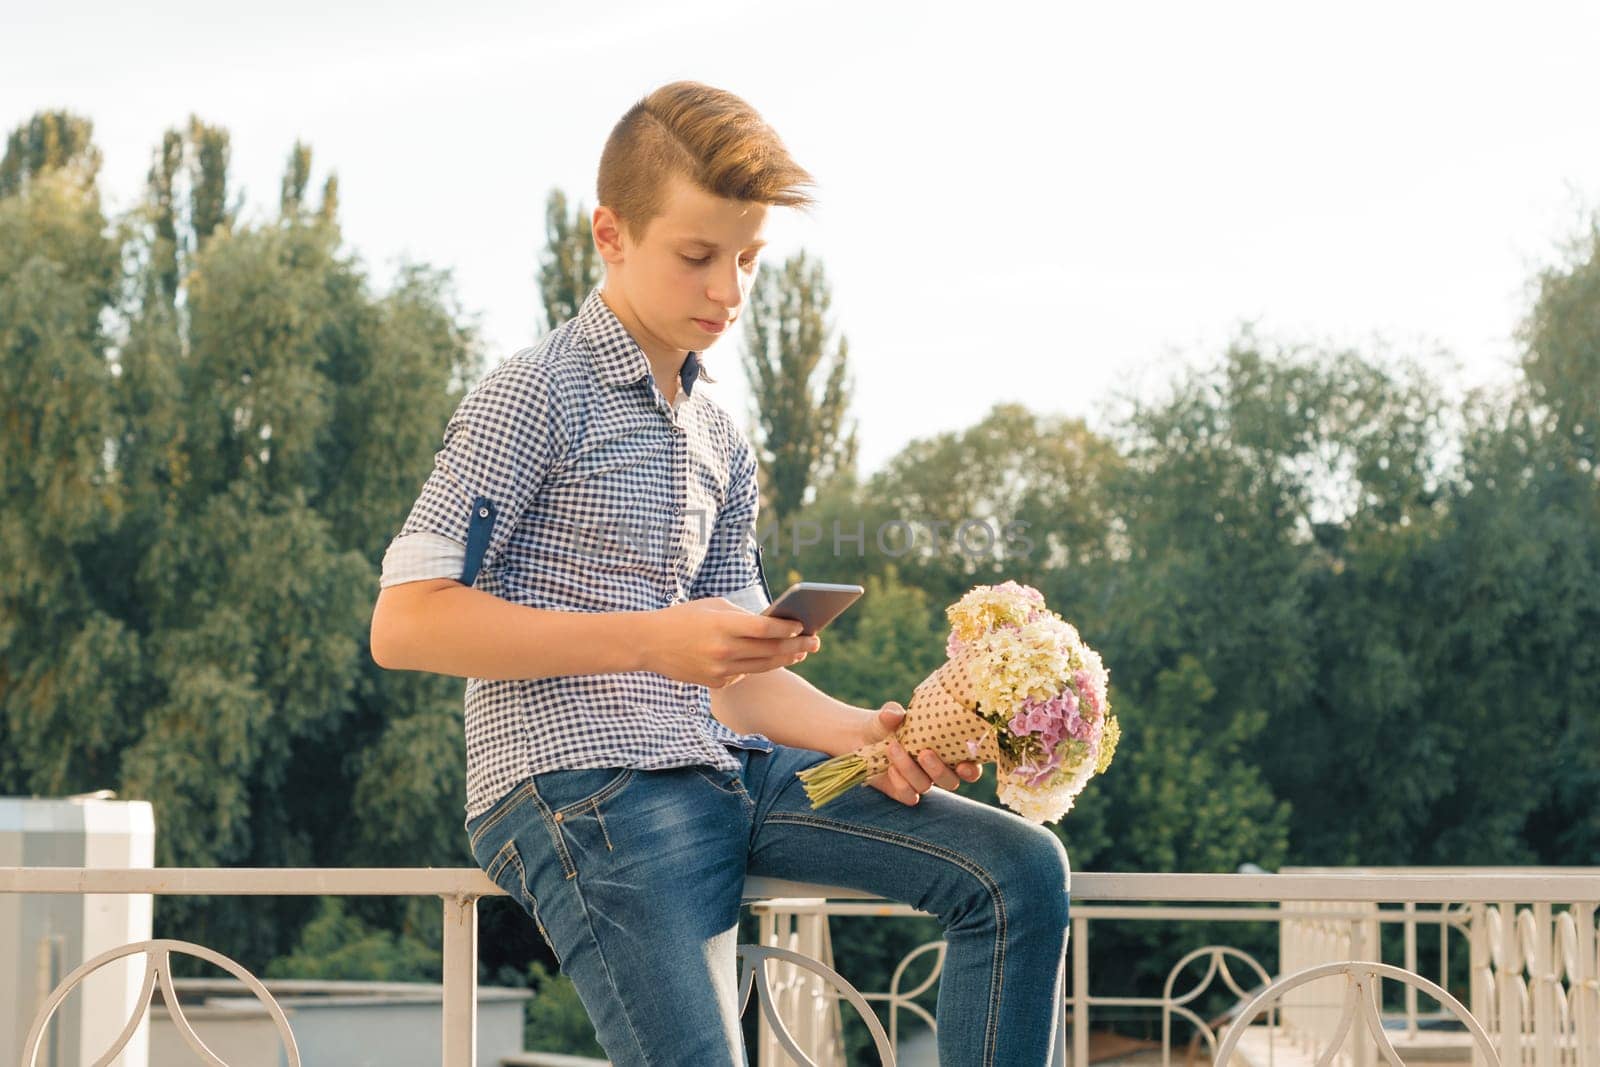 Outdoor portrait of teenage boy with bouquet of flowers, reading text on smartphone, urban background.